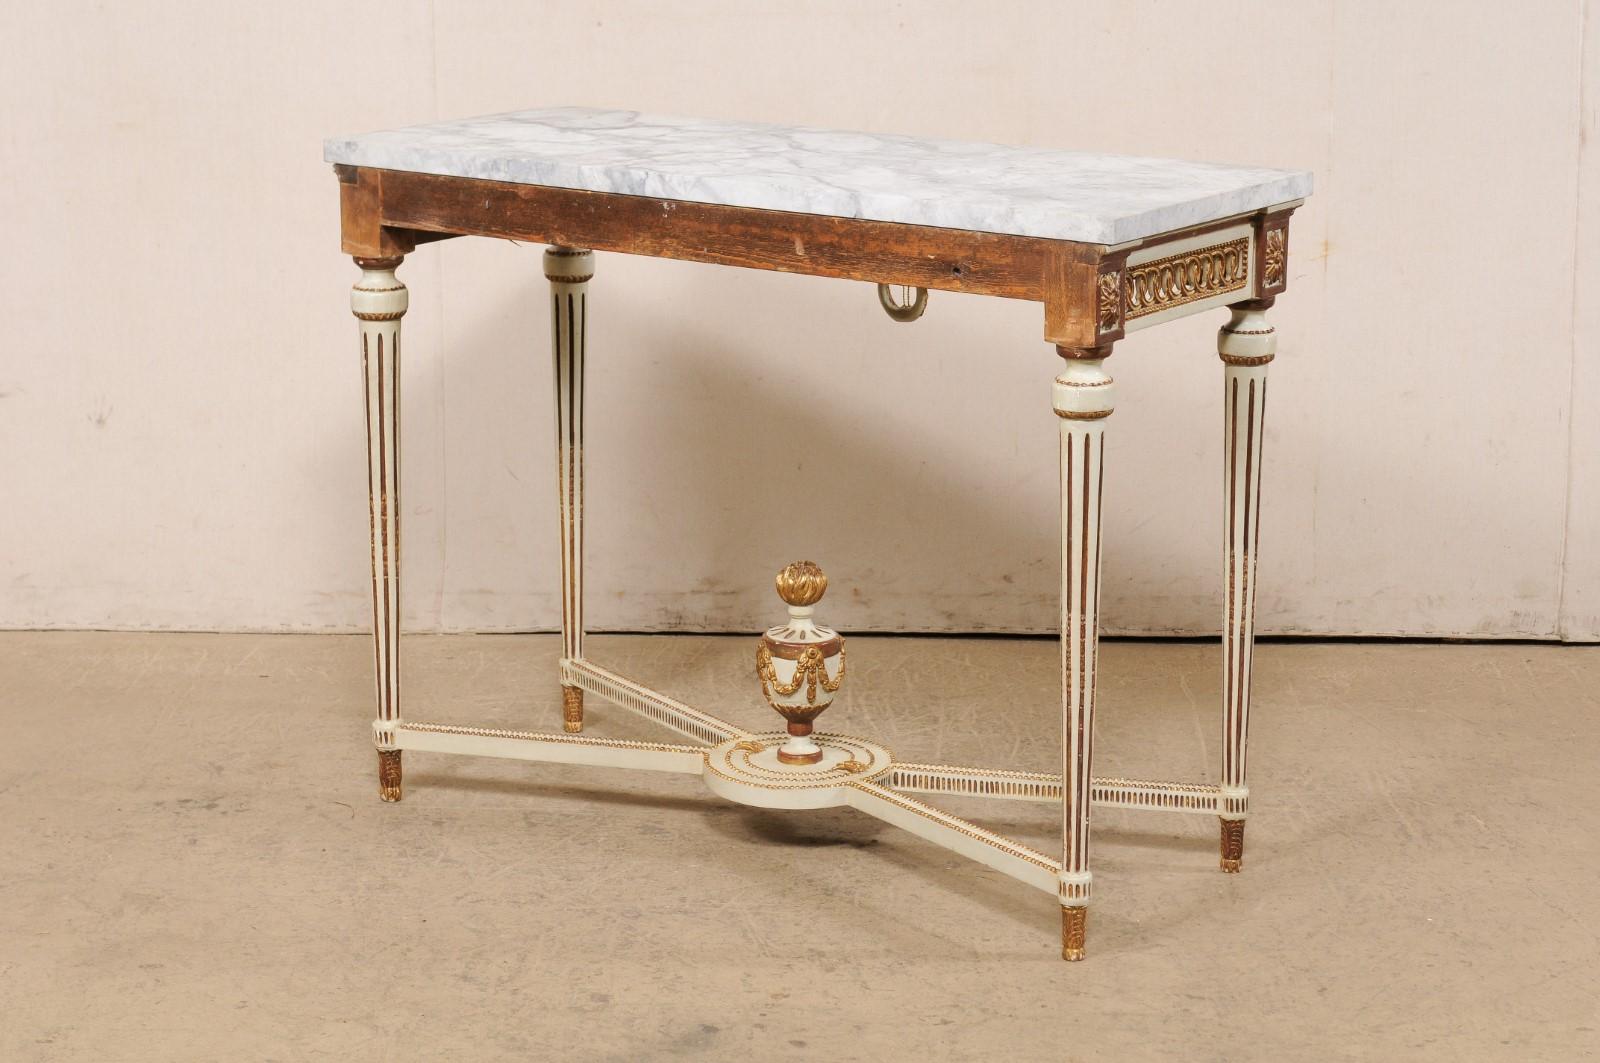 Italian Marble Top Console w/Pierce-Carved Apron & Large Urn Finial at Underside For Sale 3